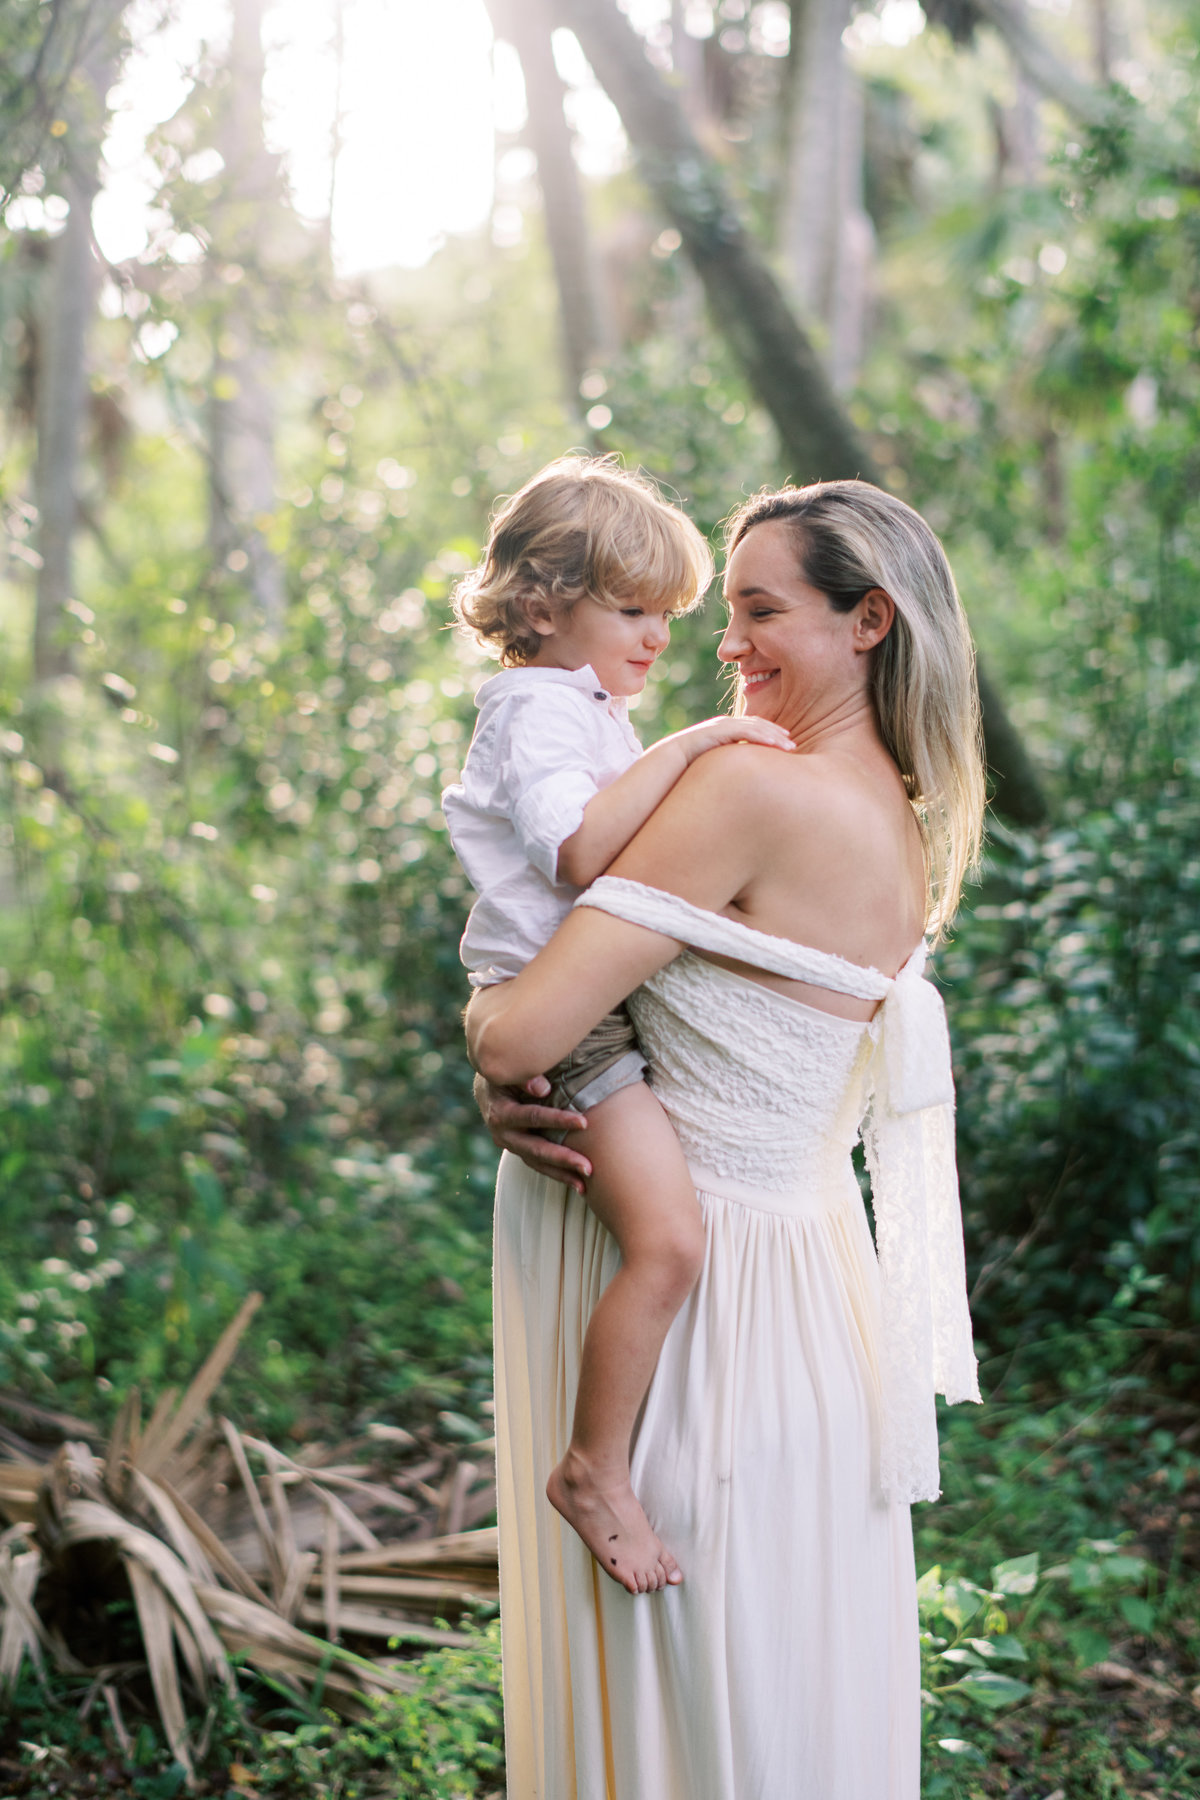 jessica deyoung photography - leamaternity-61